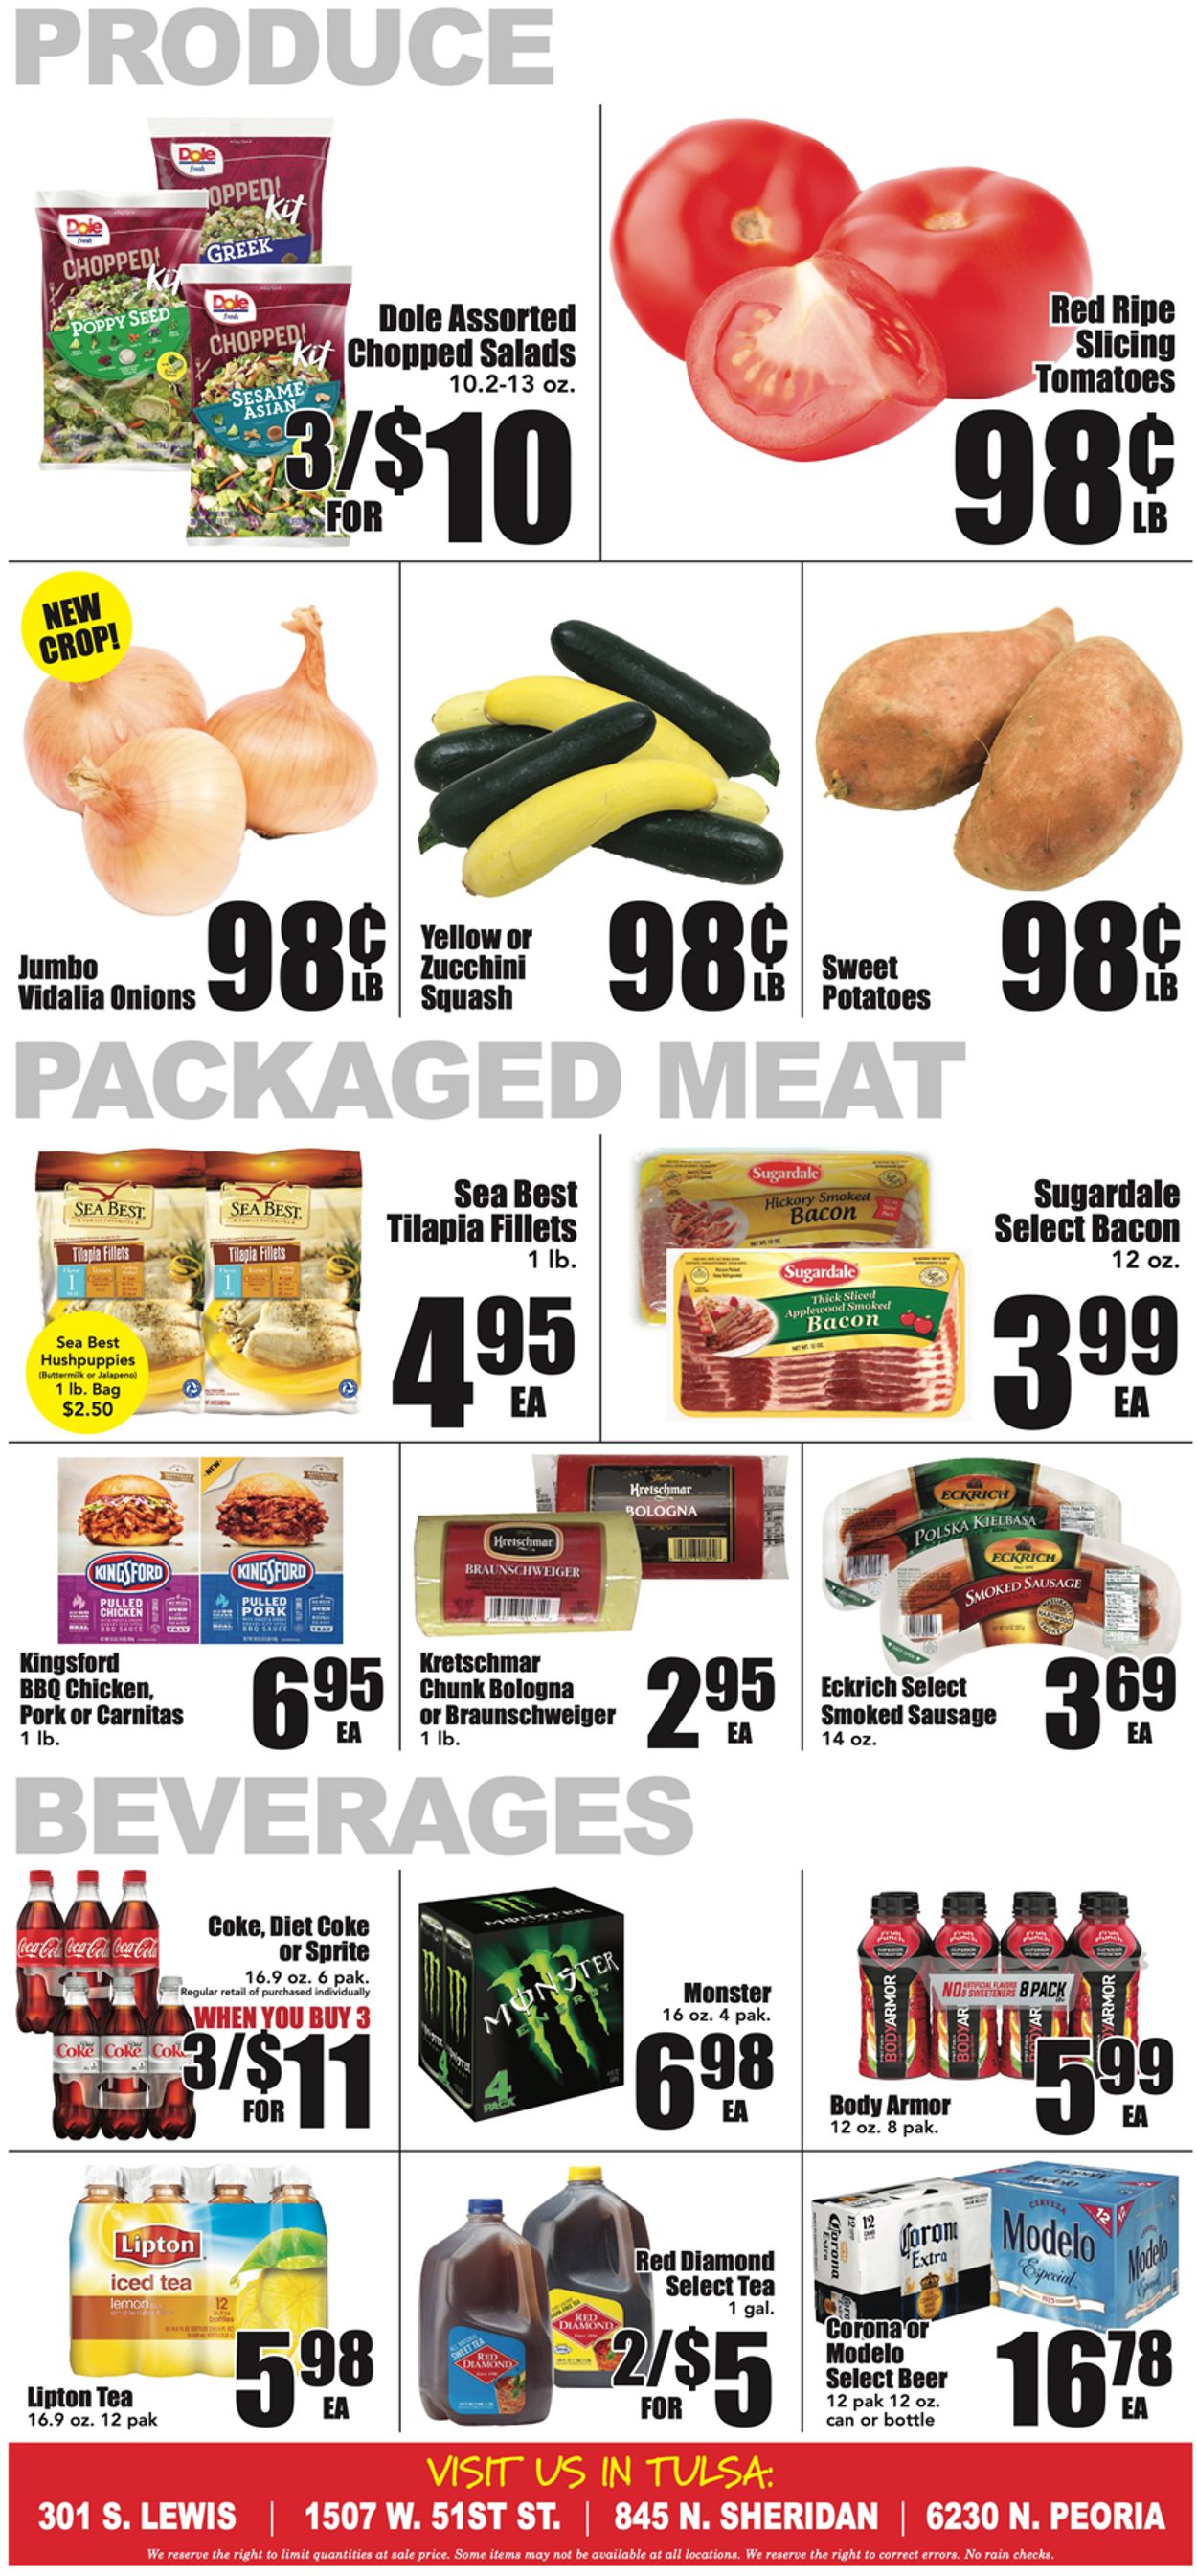 Warehouse Market Ad from 05/11/2022